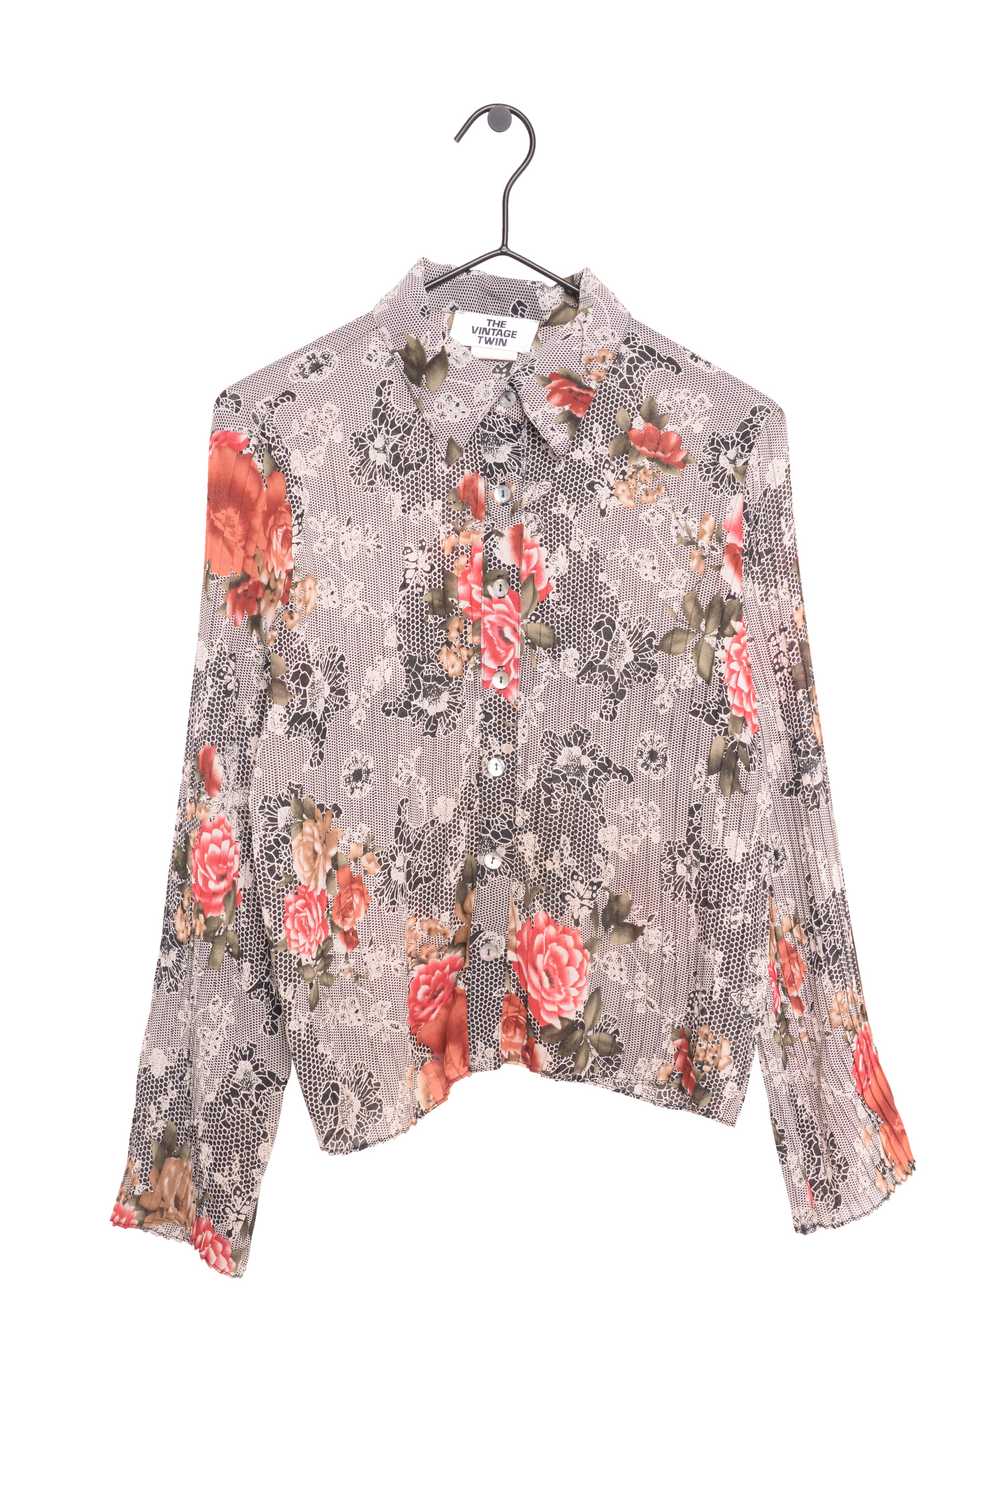 1990s Floral Button Top USA - image 1